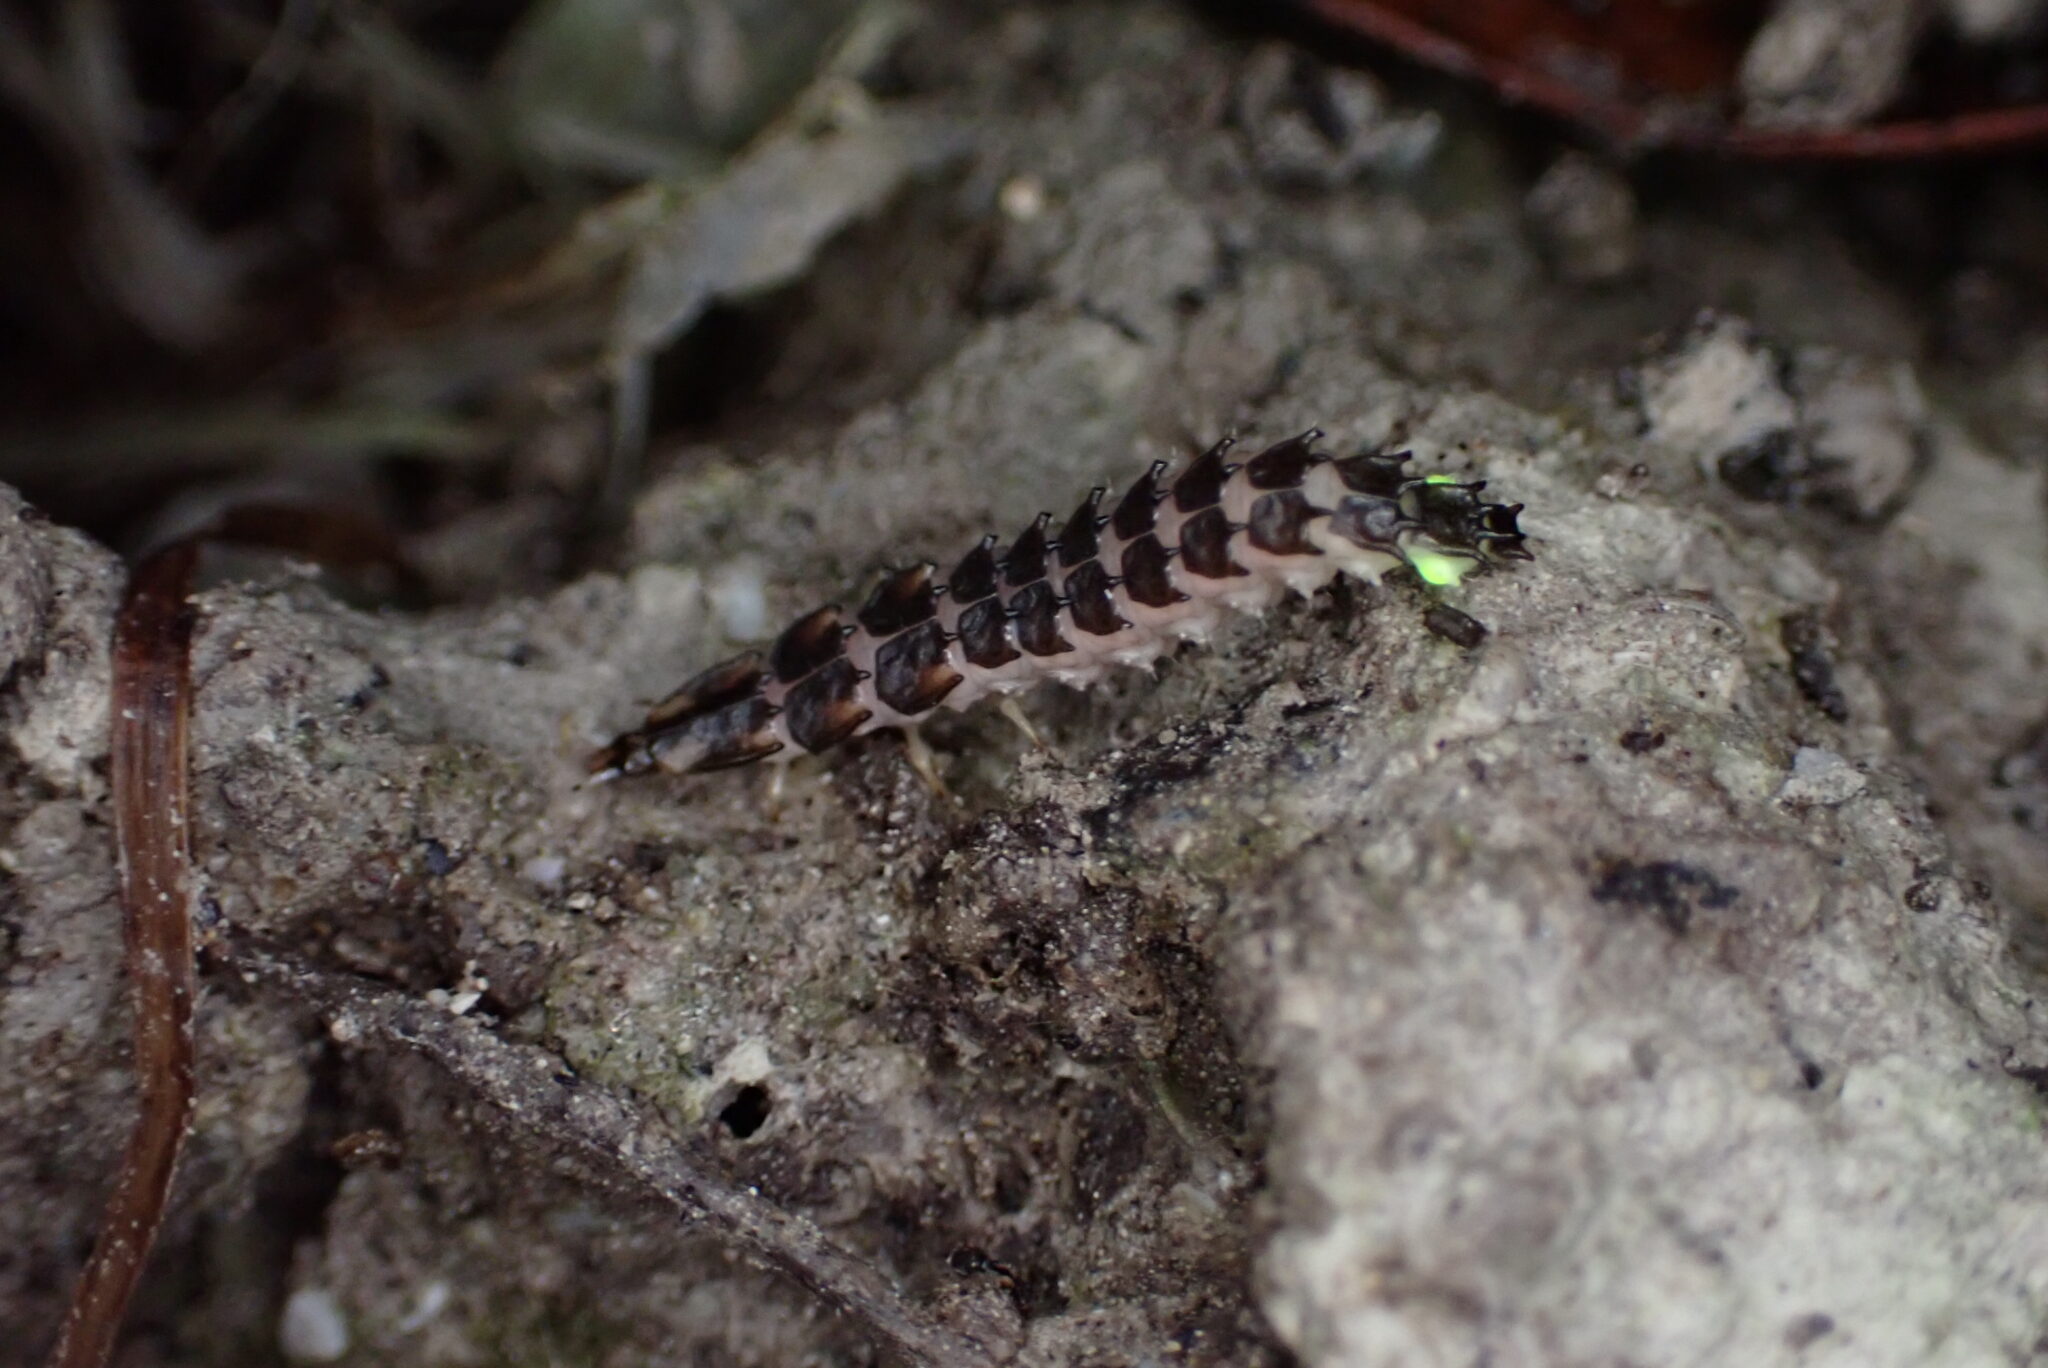 A grub-like firefly larva with spiked plates on its back crawls across wet sand and emits two greenish lights from its back end.